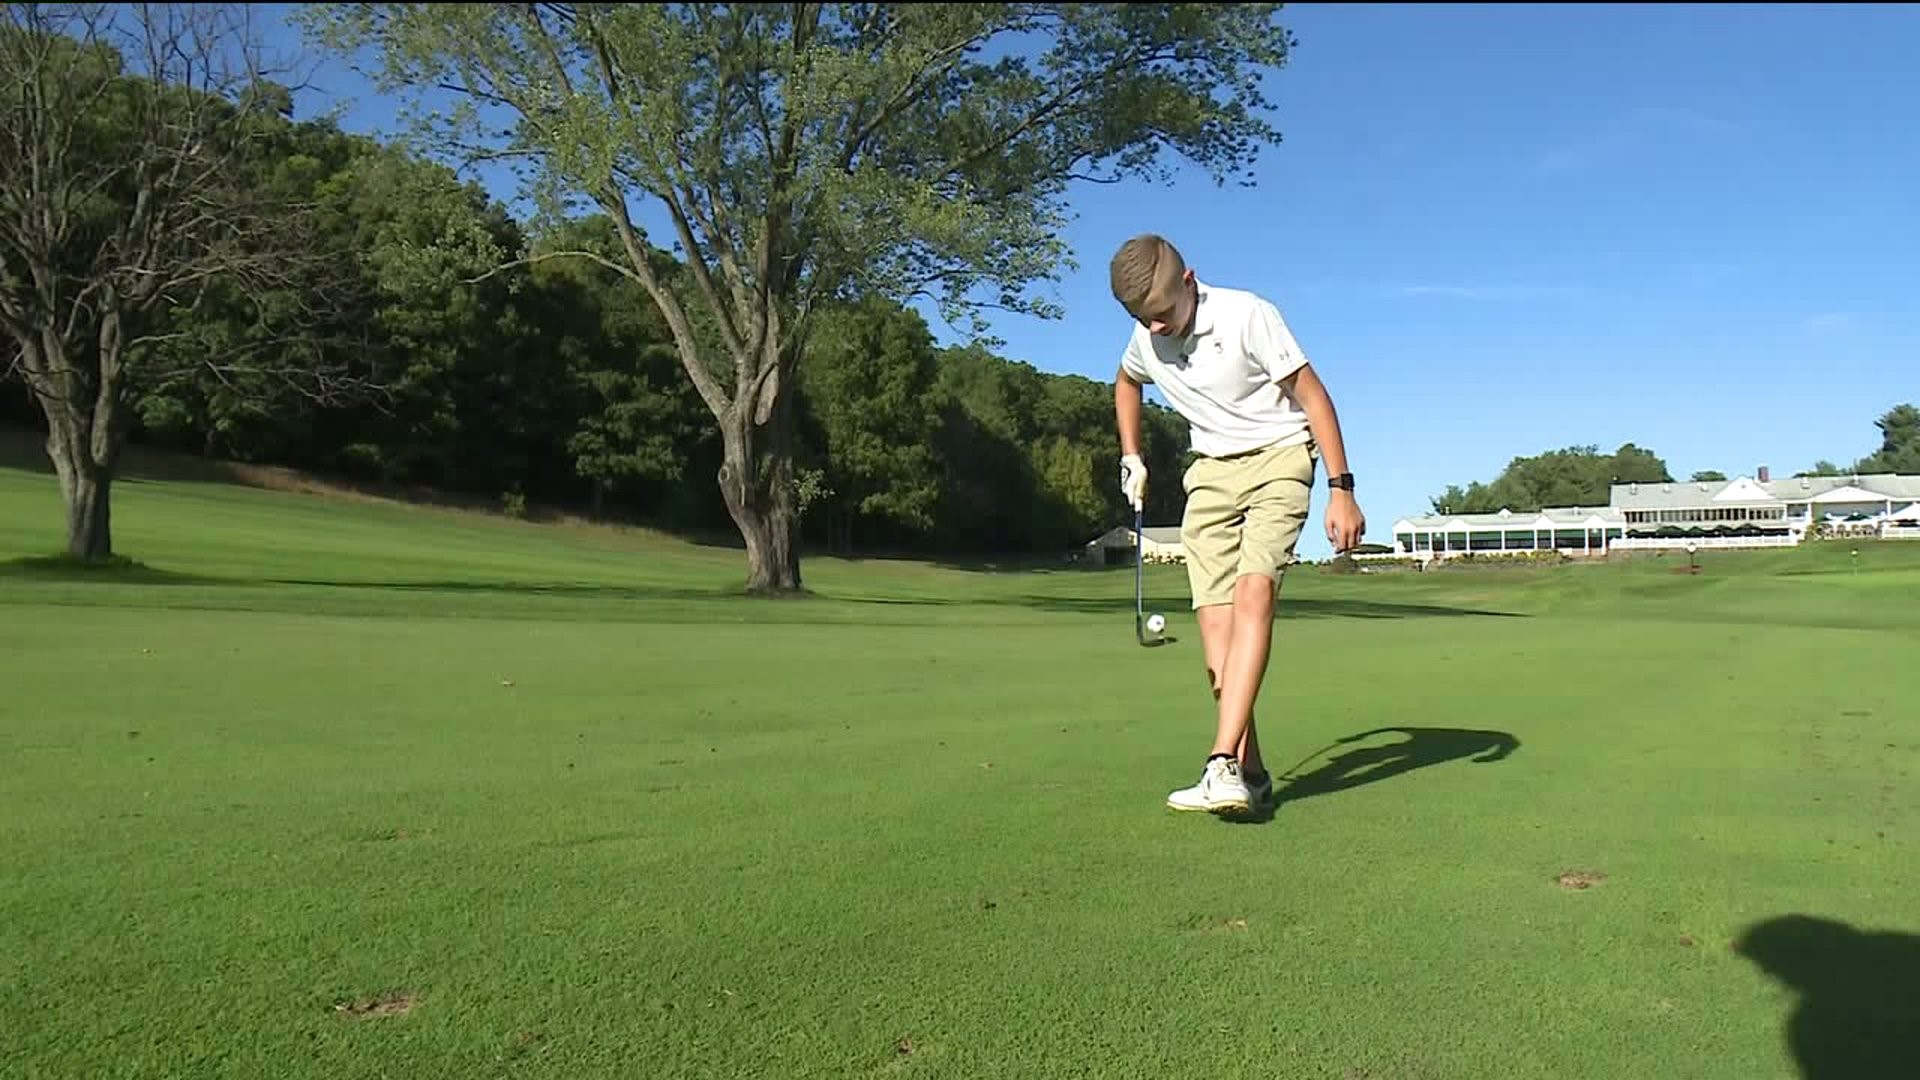 12 Year Old to Play at Augusta National During Masters